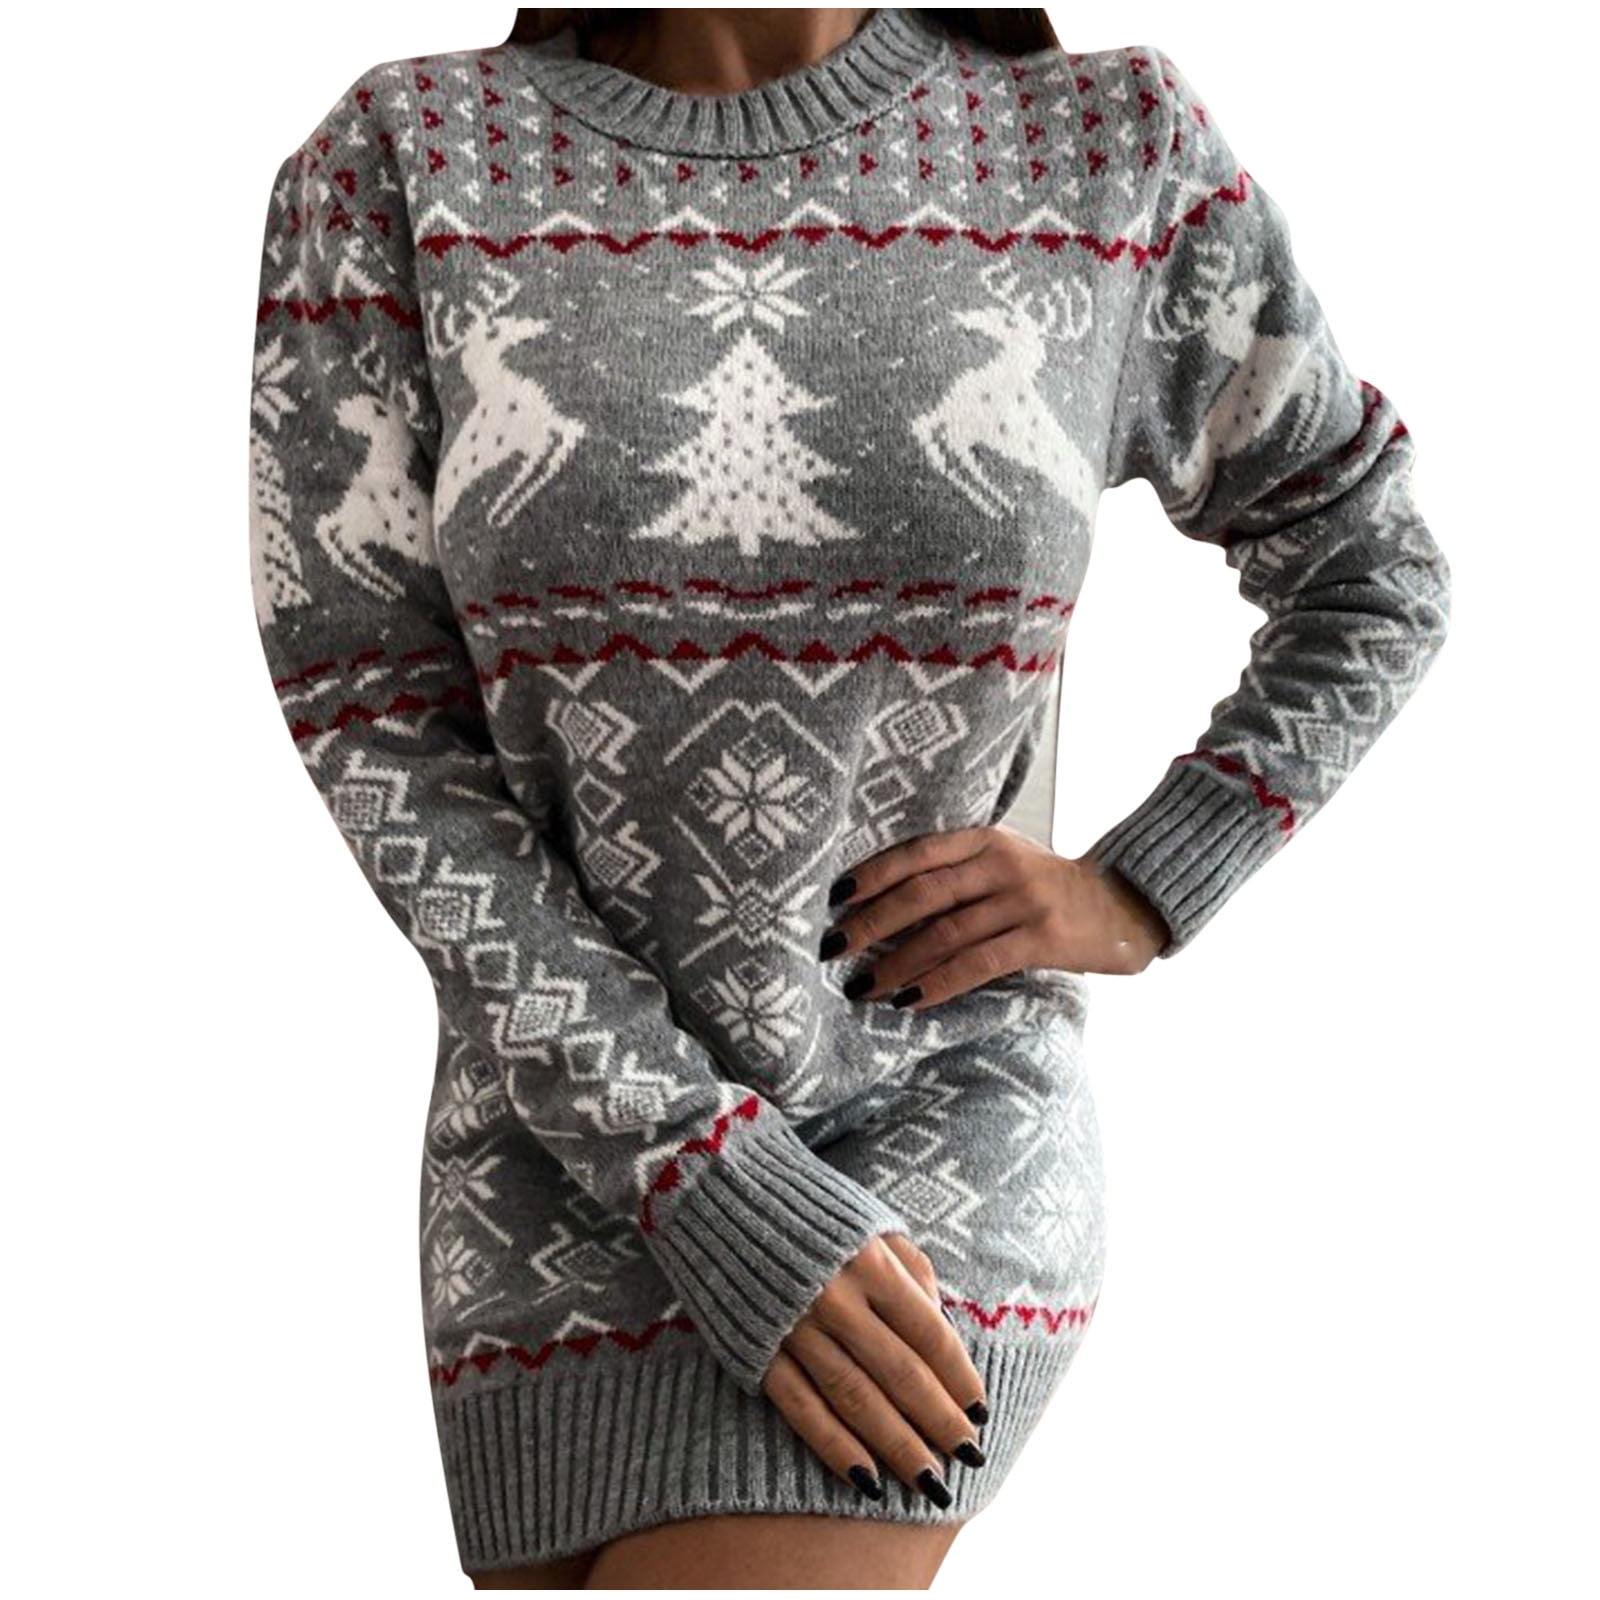 Long Sweaters for Women Wrap Sweater Dress Womens Christmas  Christmas+Lights Gift Baskets for Couples Summer Clearance Women's Clothing  add on Items Under 1 Dollar Stuff Under 50$ Beige at  Women's Clothing